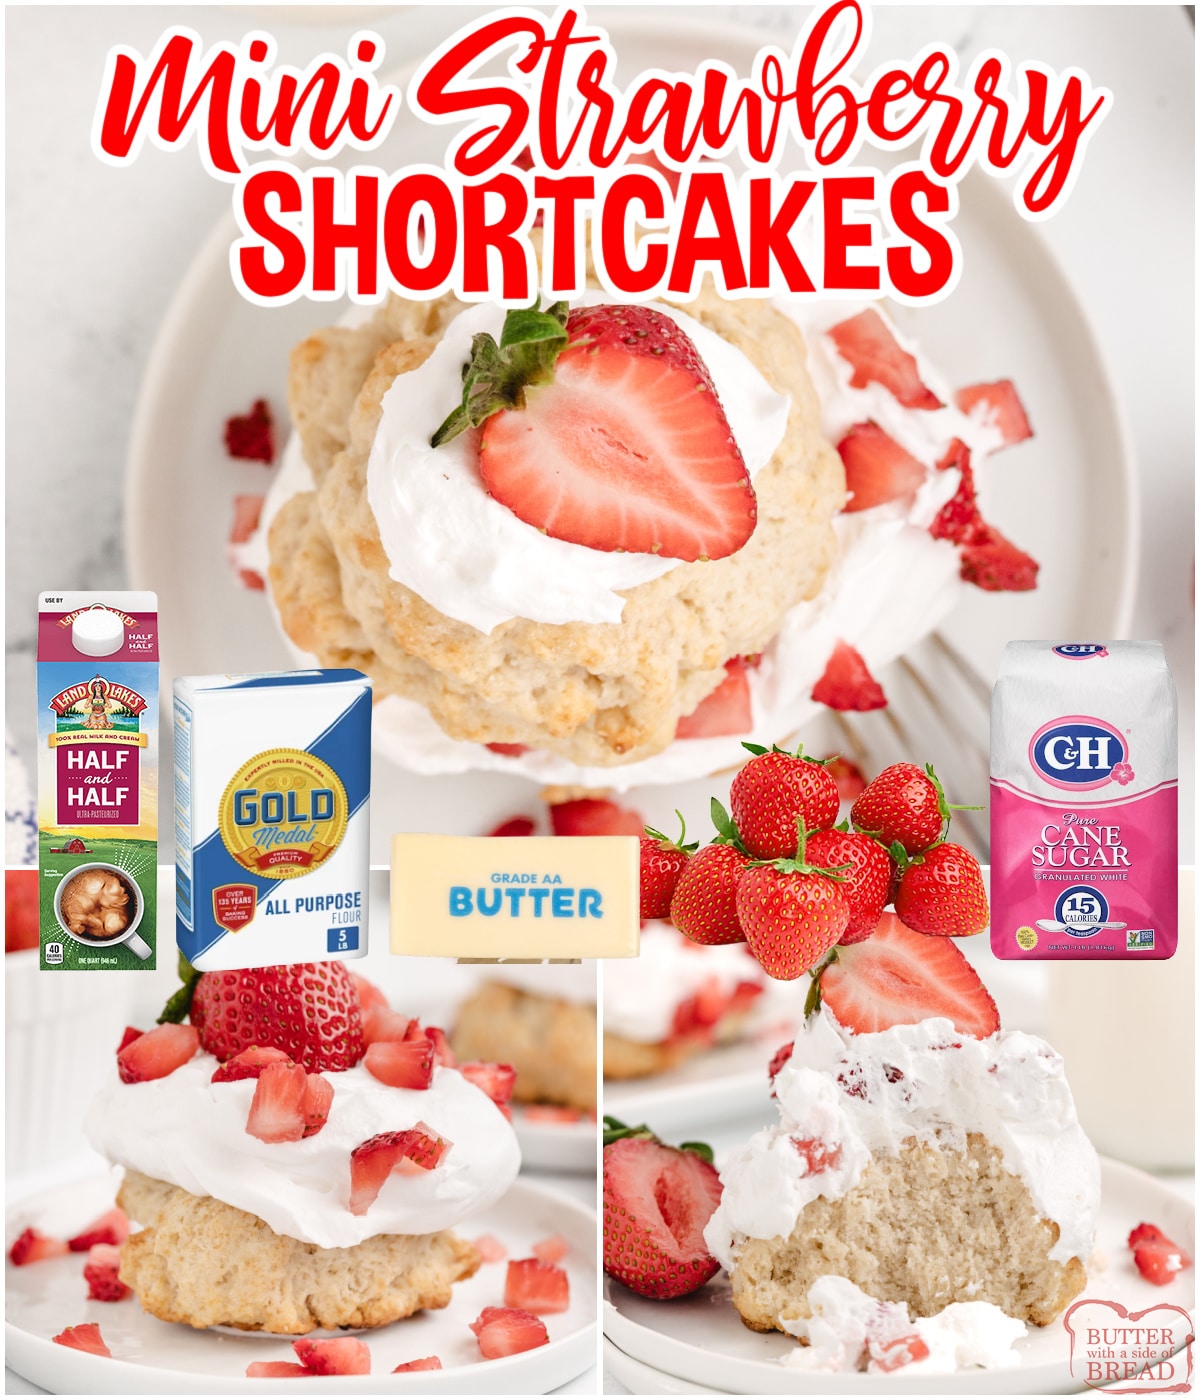 Mini Strawberry Shortcakes are made from scratch with a few basic ingredients. Perfectly portioned dessert made with fresh strawberries and whipped cream. 